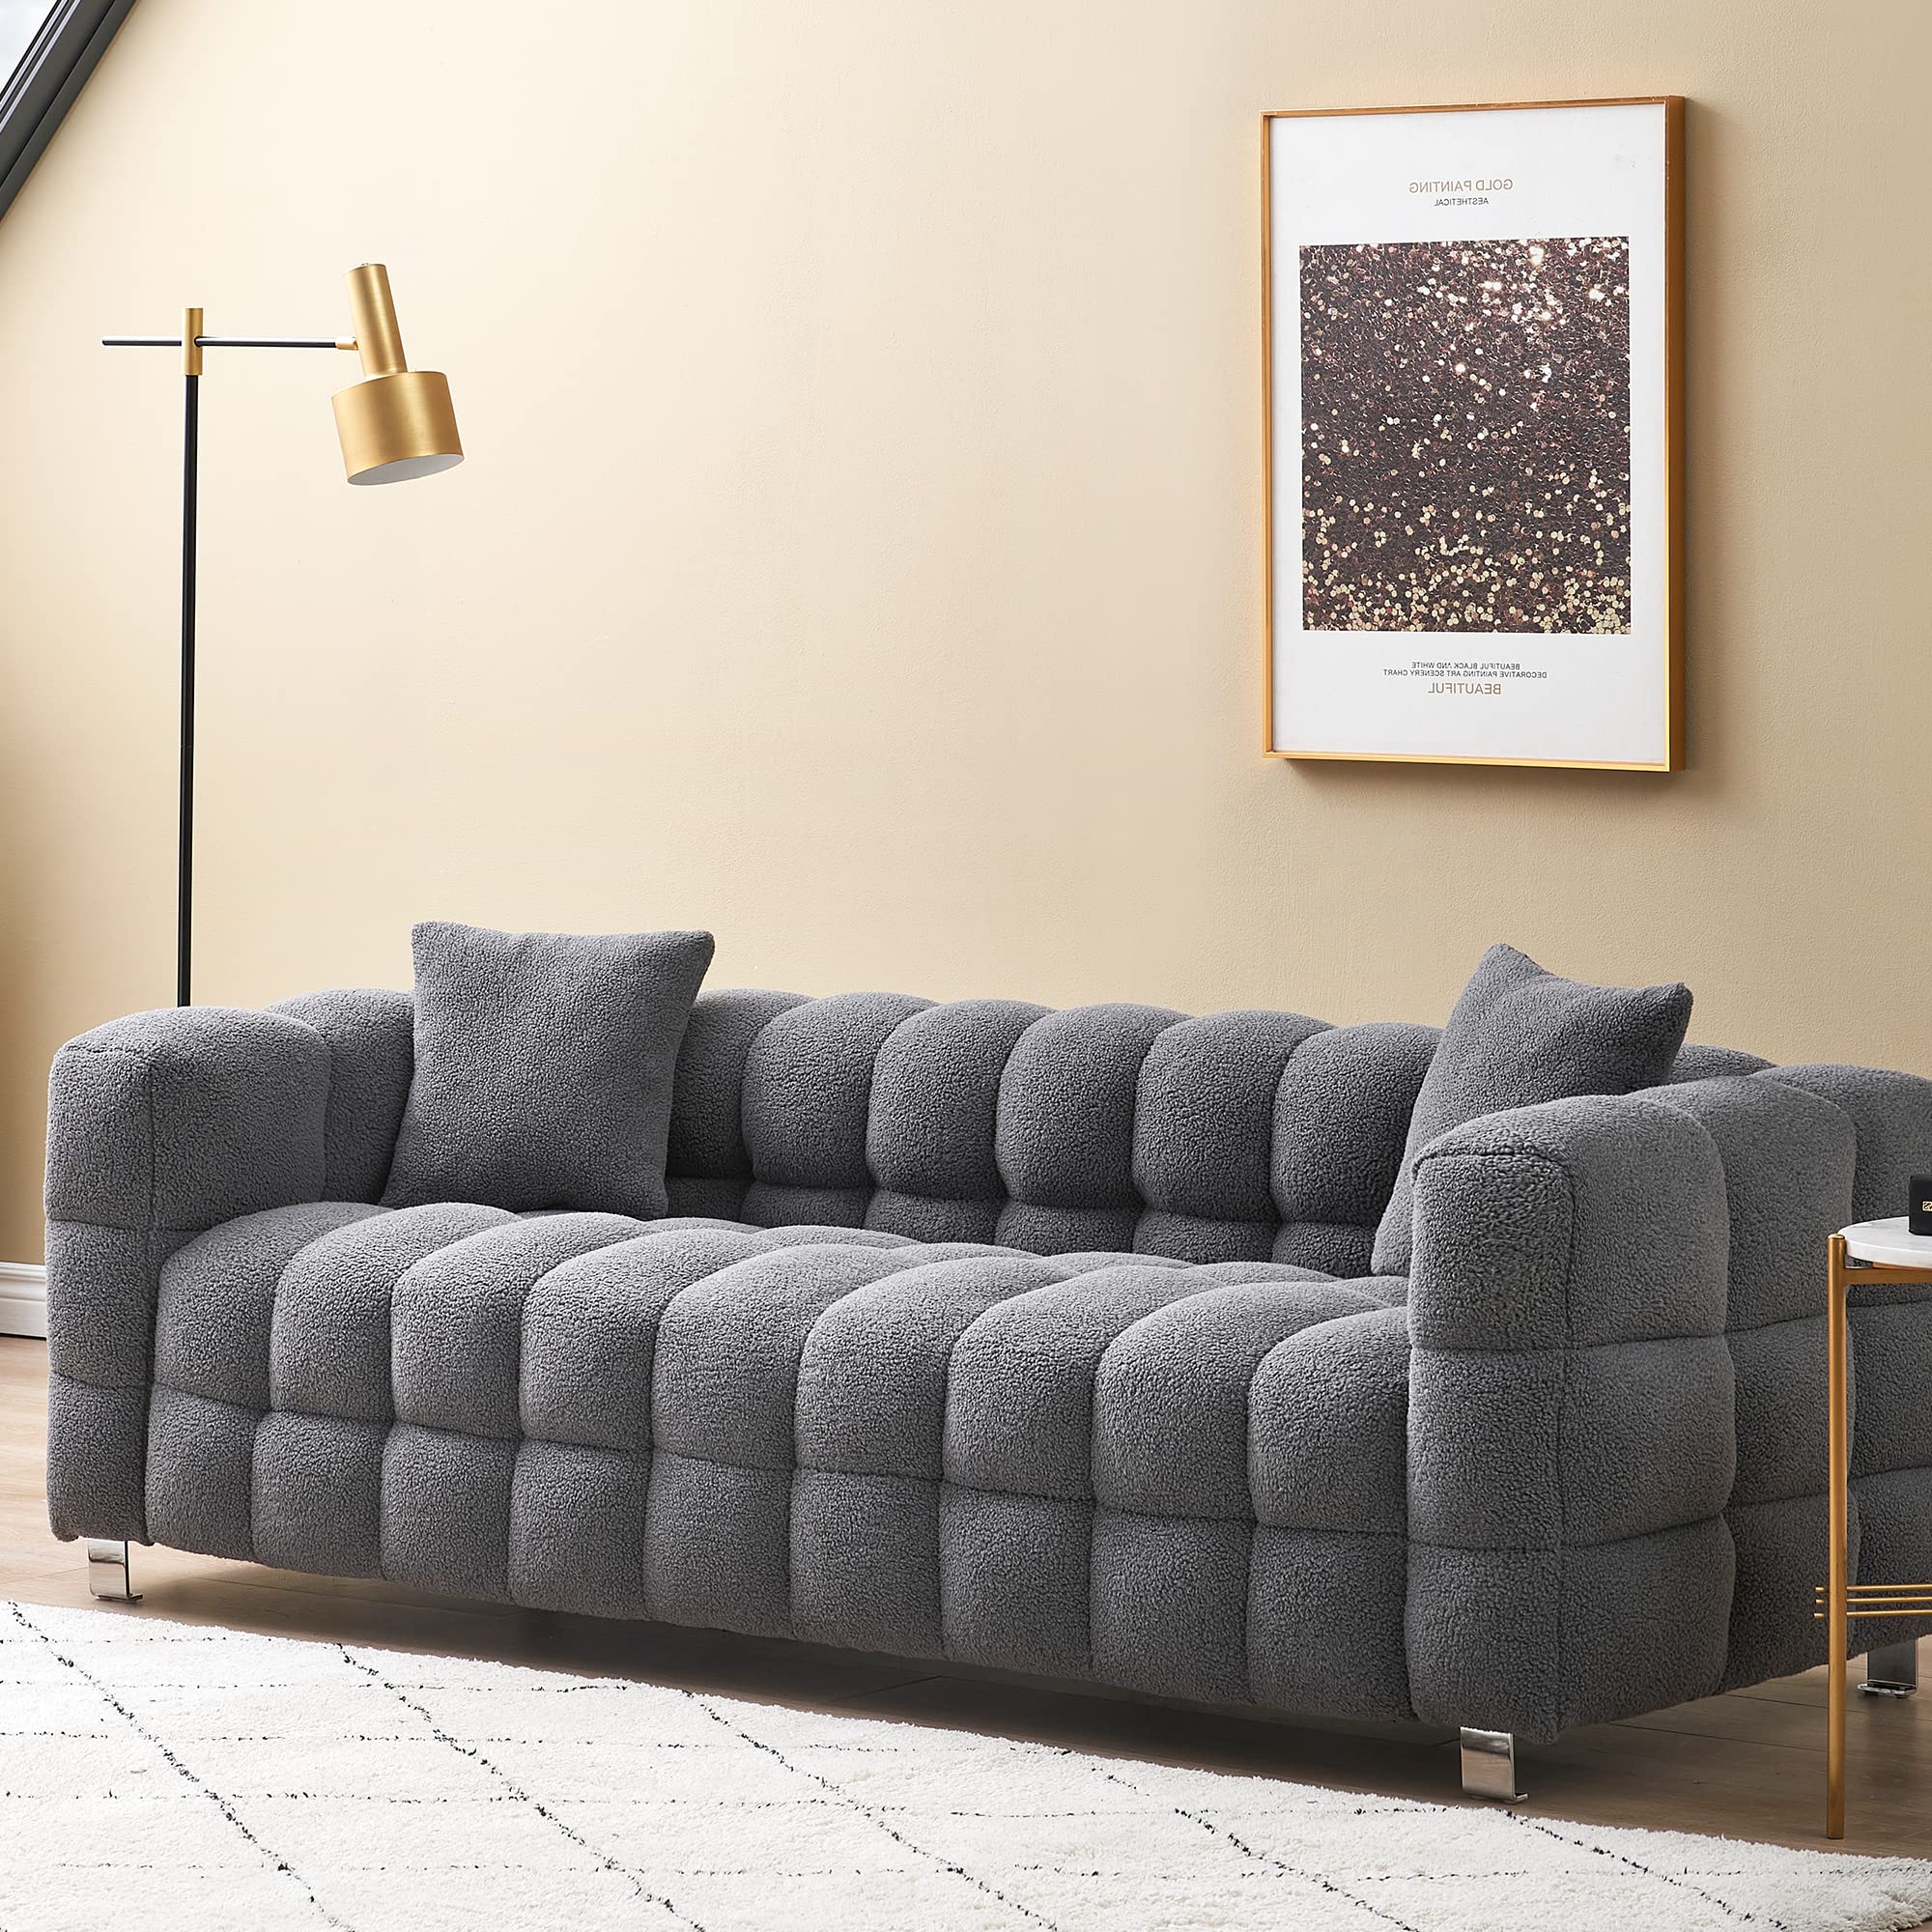 Dolonm Modern Sofa Couch with Metal Legs Upholstered Tufted 3 Seater Couch with 2 Pillows Decor Furniture for Living Room, Bedro